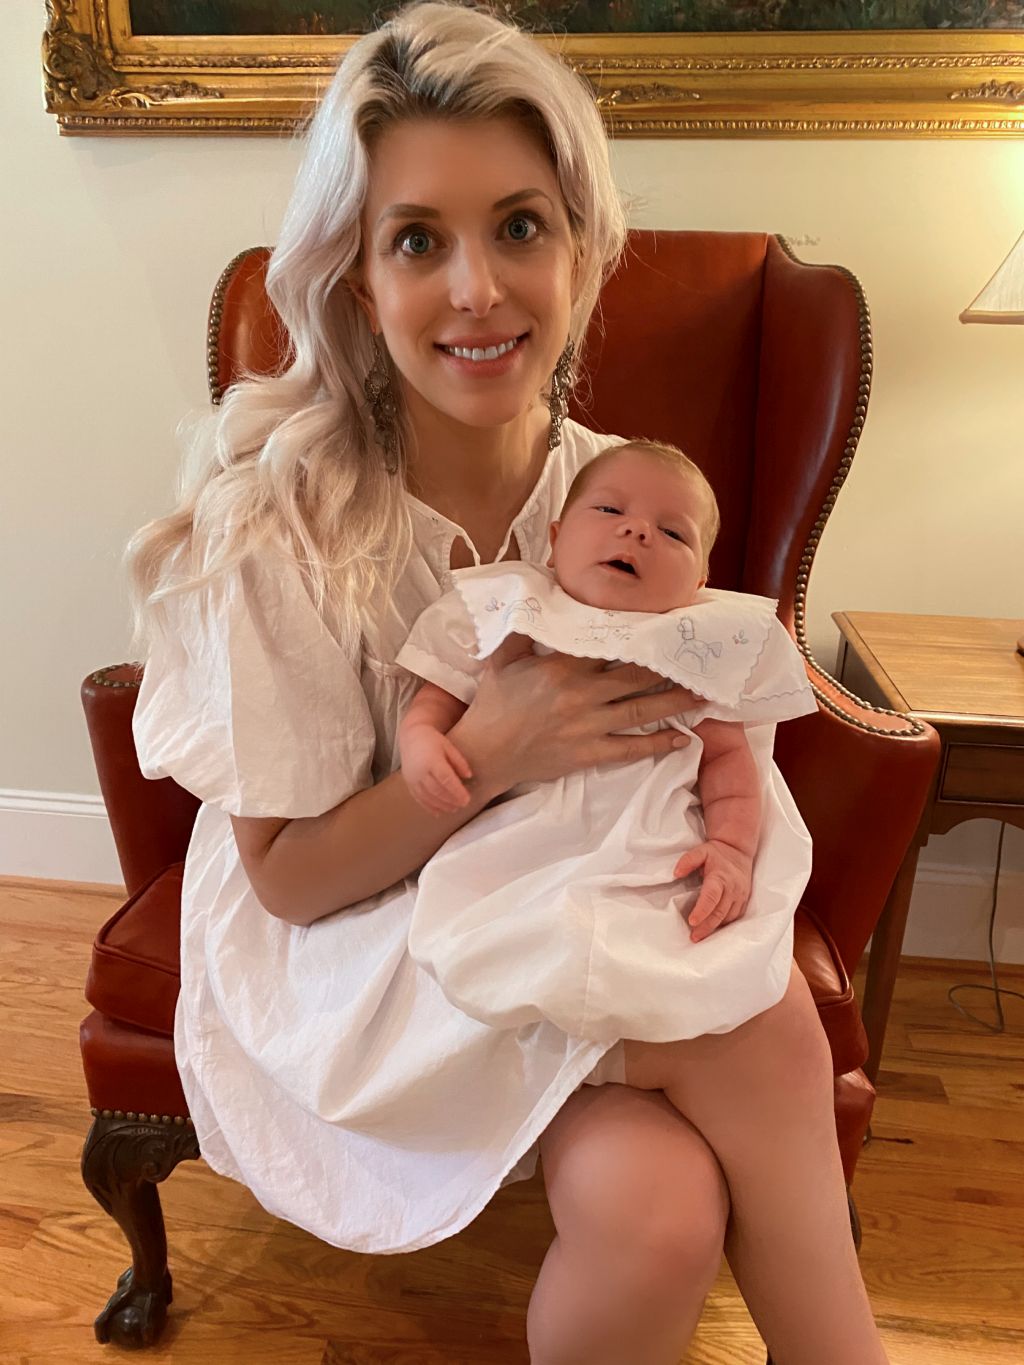 A pretty Christian woman holds her baby while seated